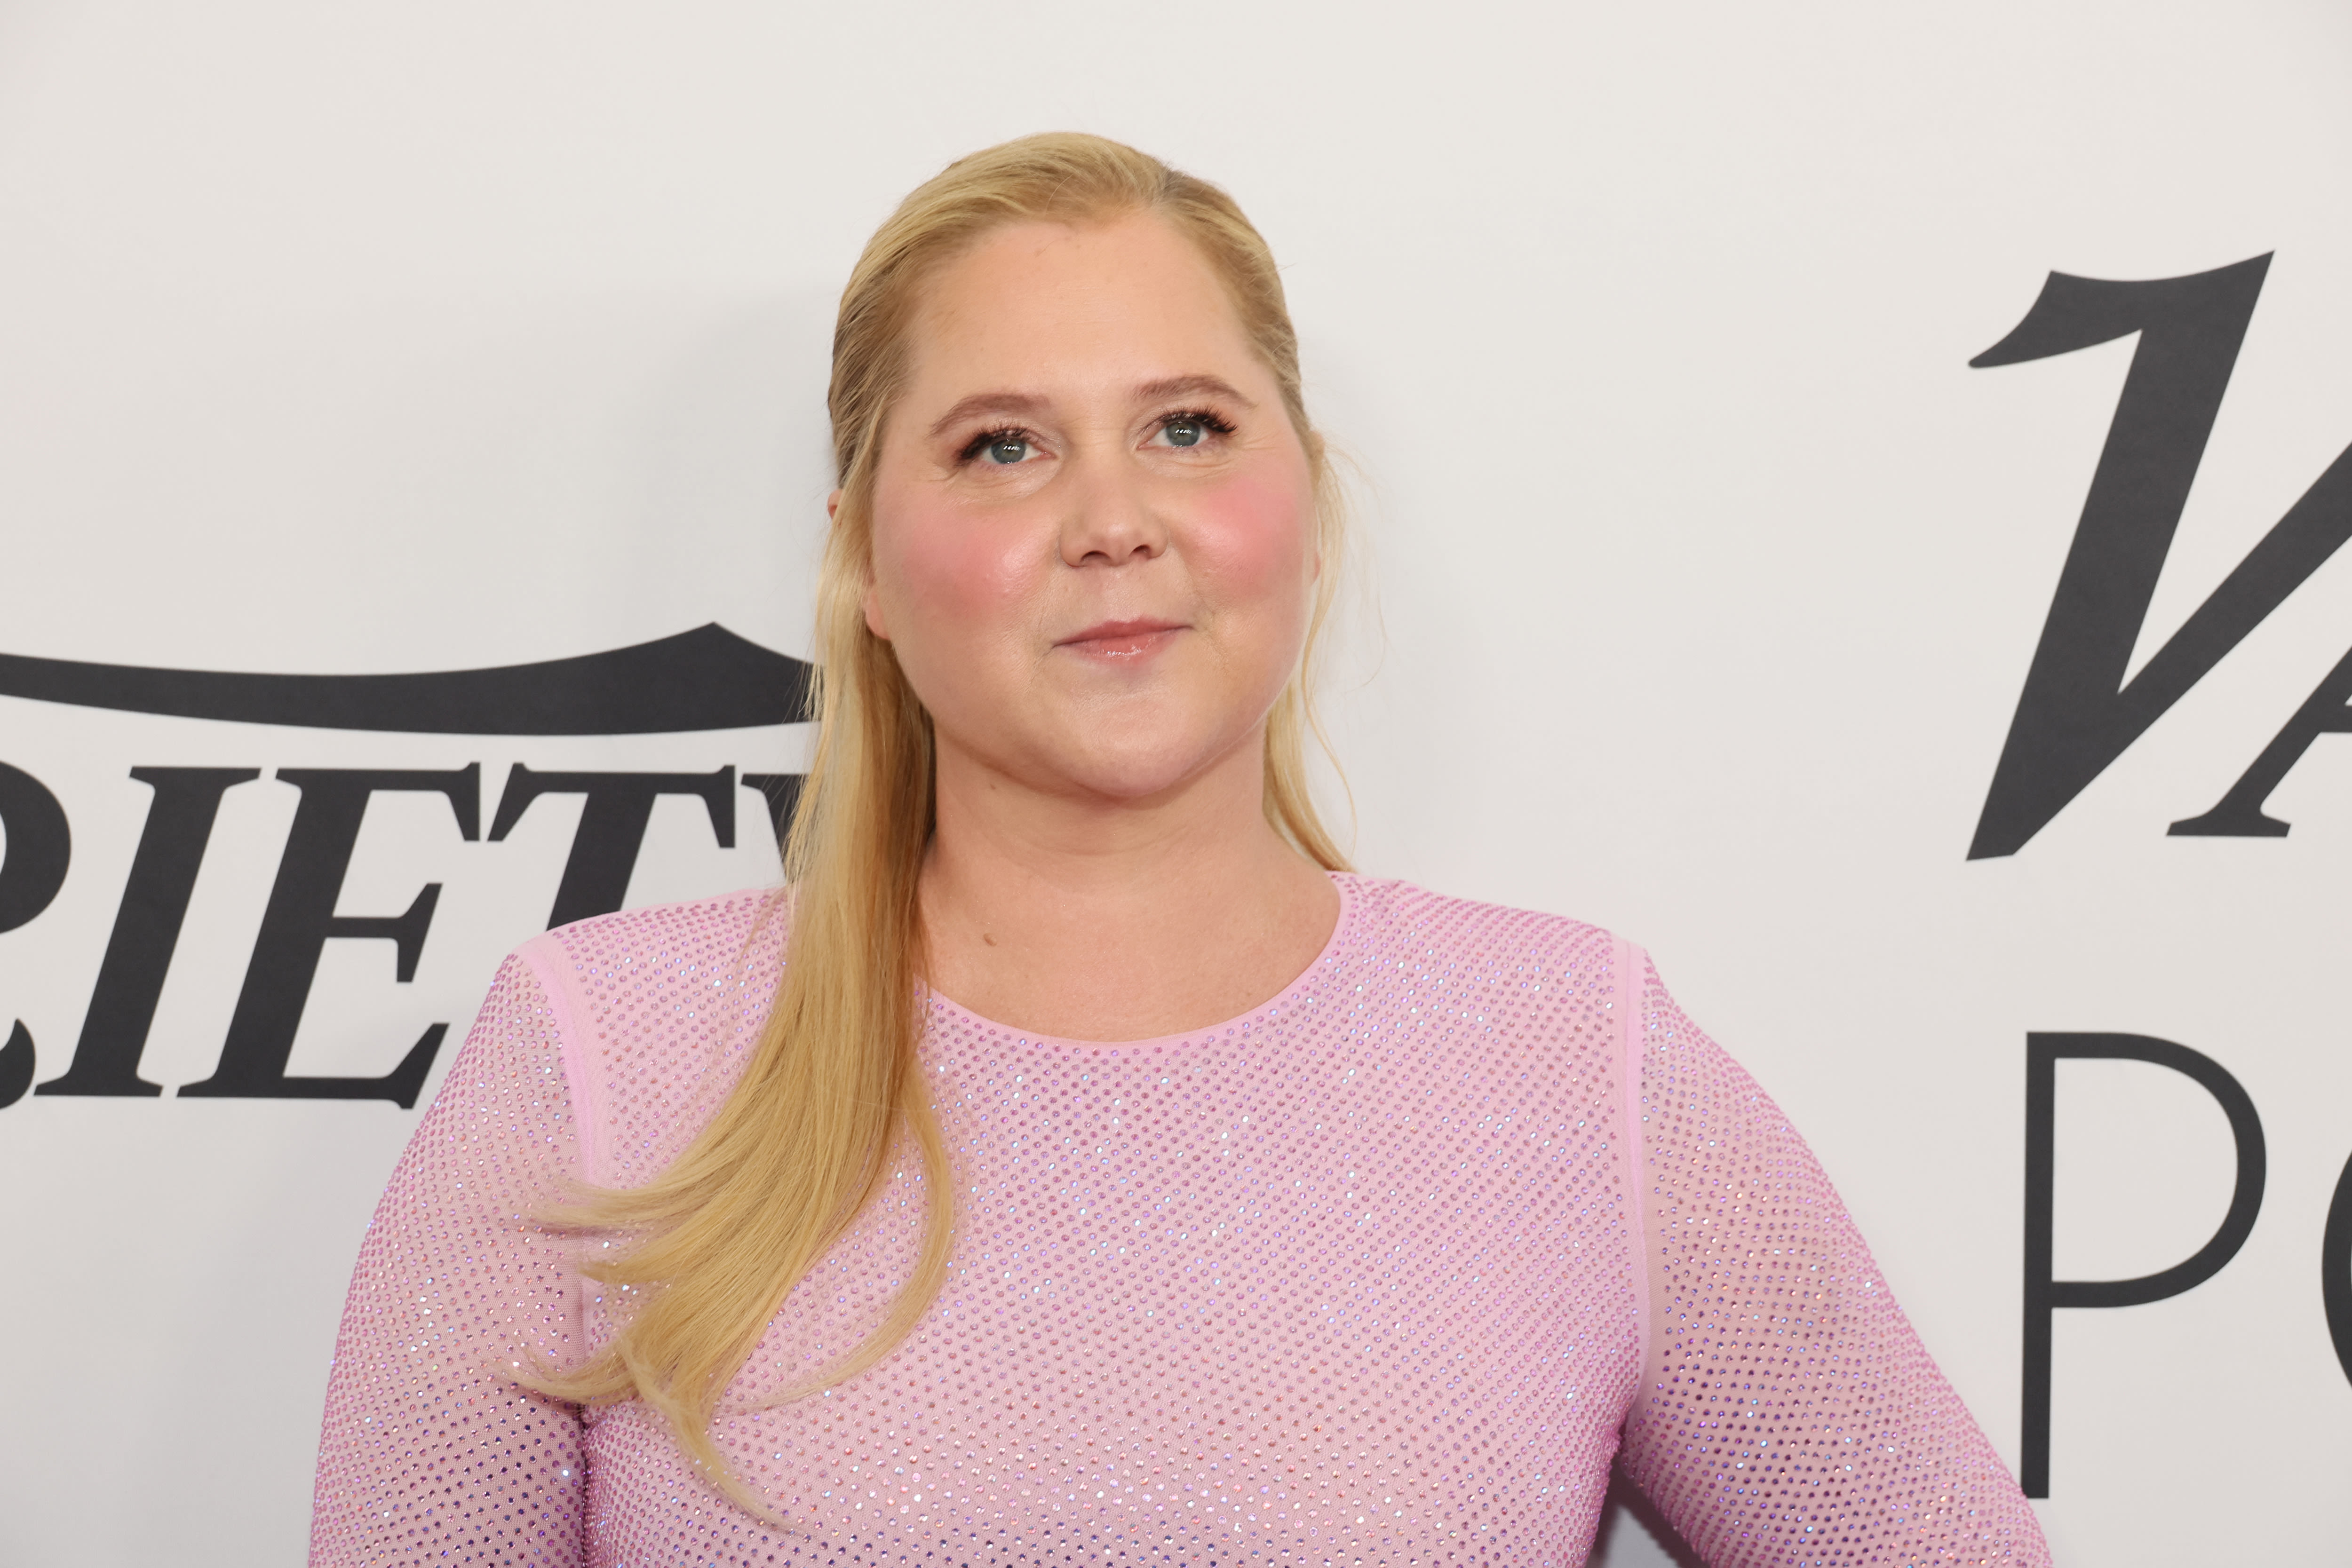 Amy Schumer says she feels 'a lot better' amid treatment for Cushing syndrome. Here's what to know about the disorder.